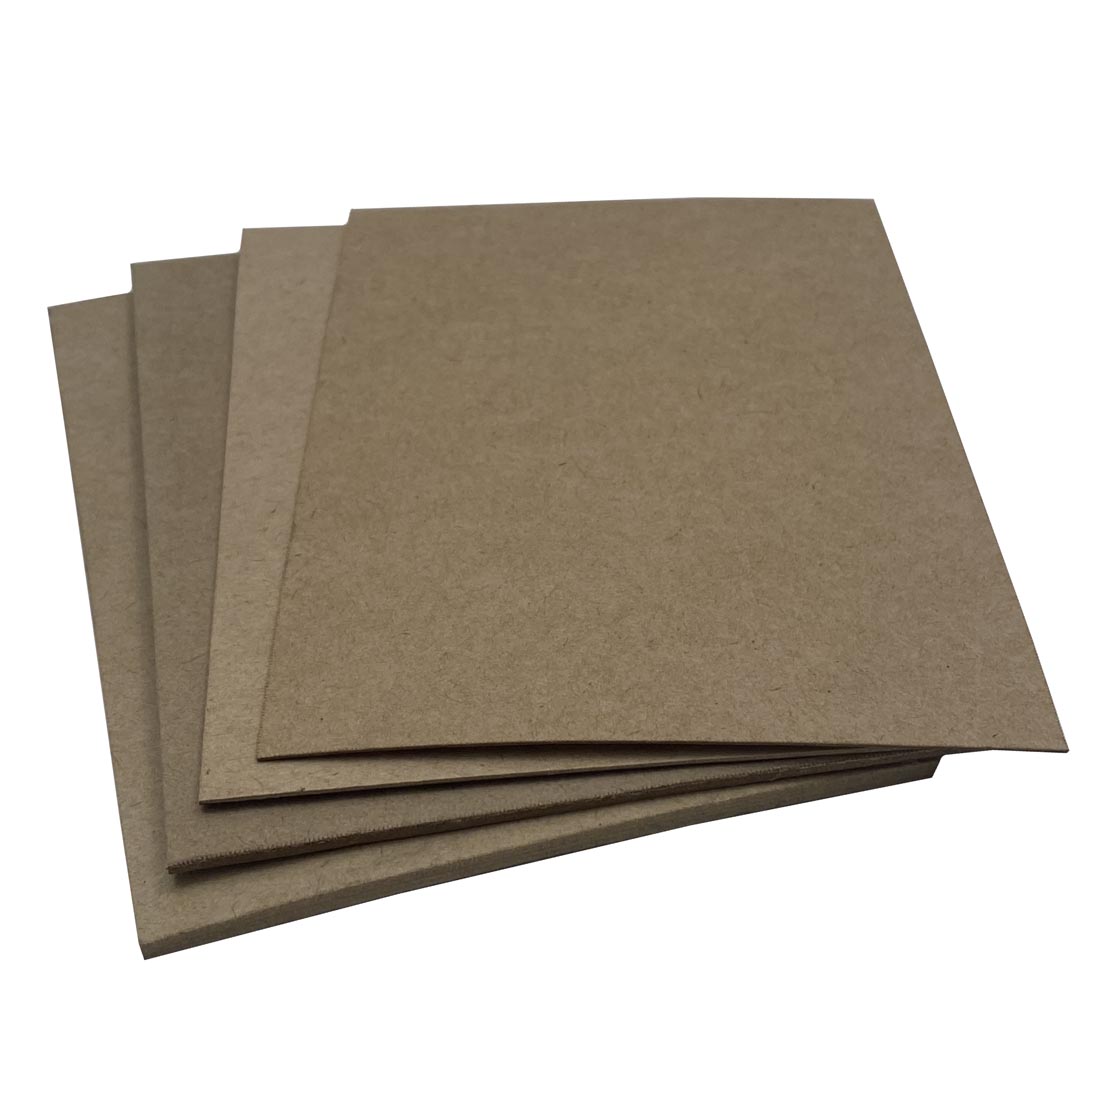 Oil Jointing Gasket Paper